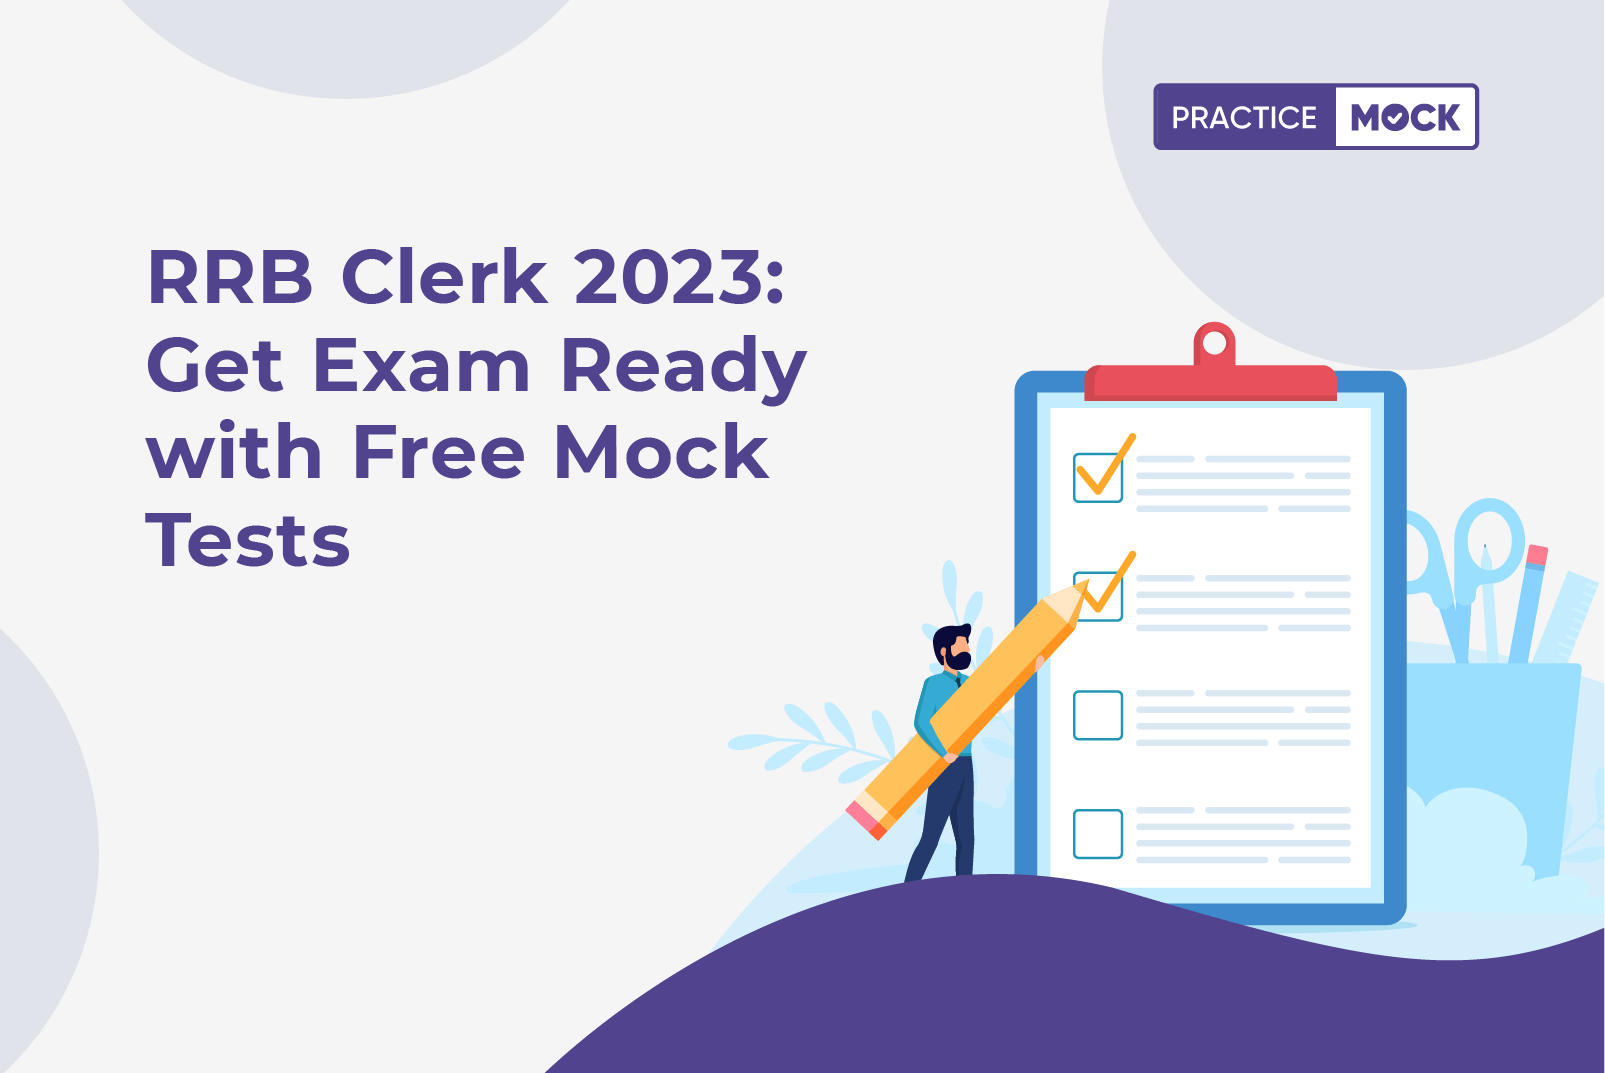 RRB Clerk 2023 Get Exam Ready with Free Mock Tests